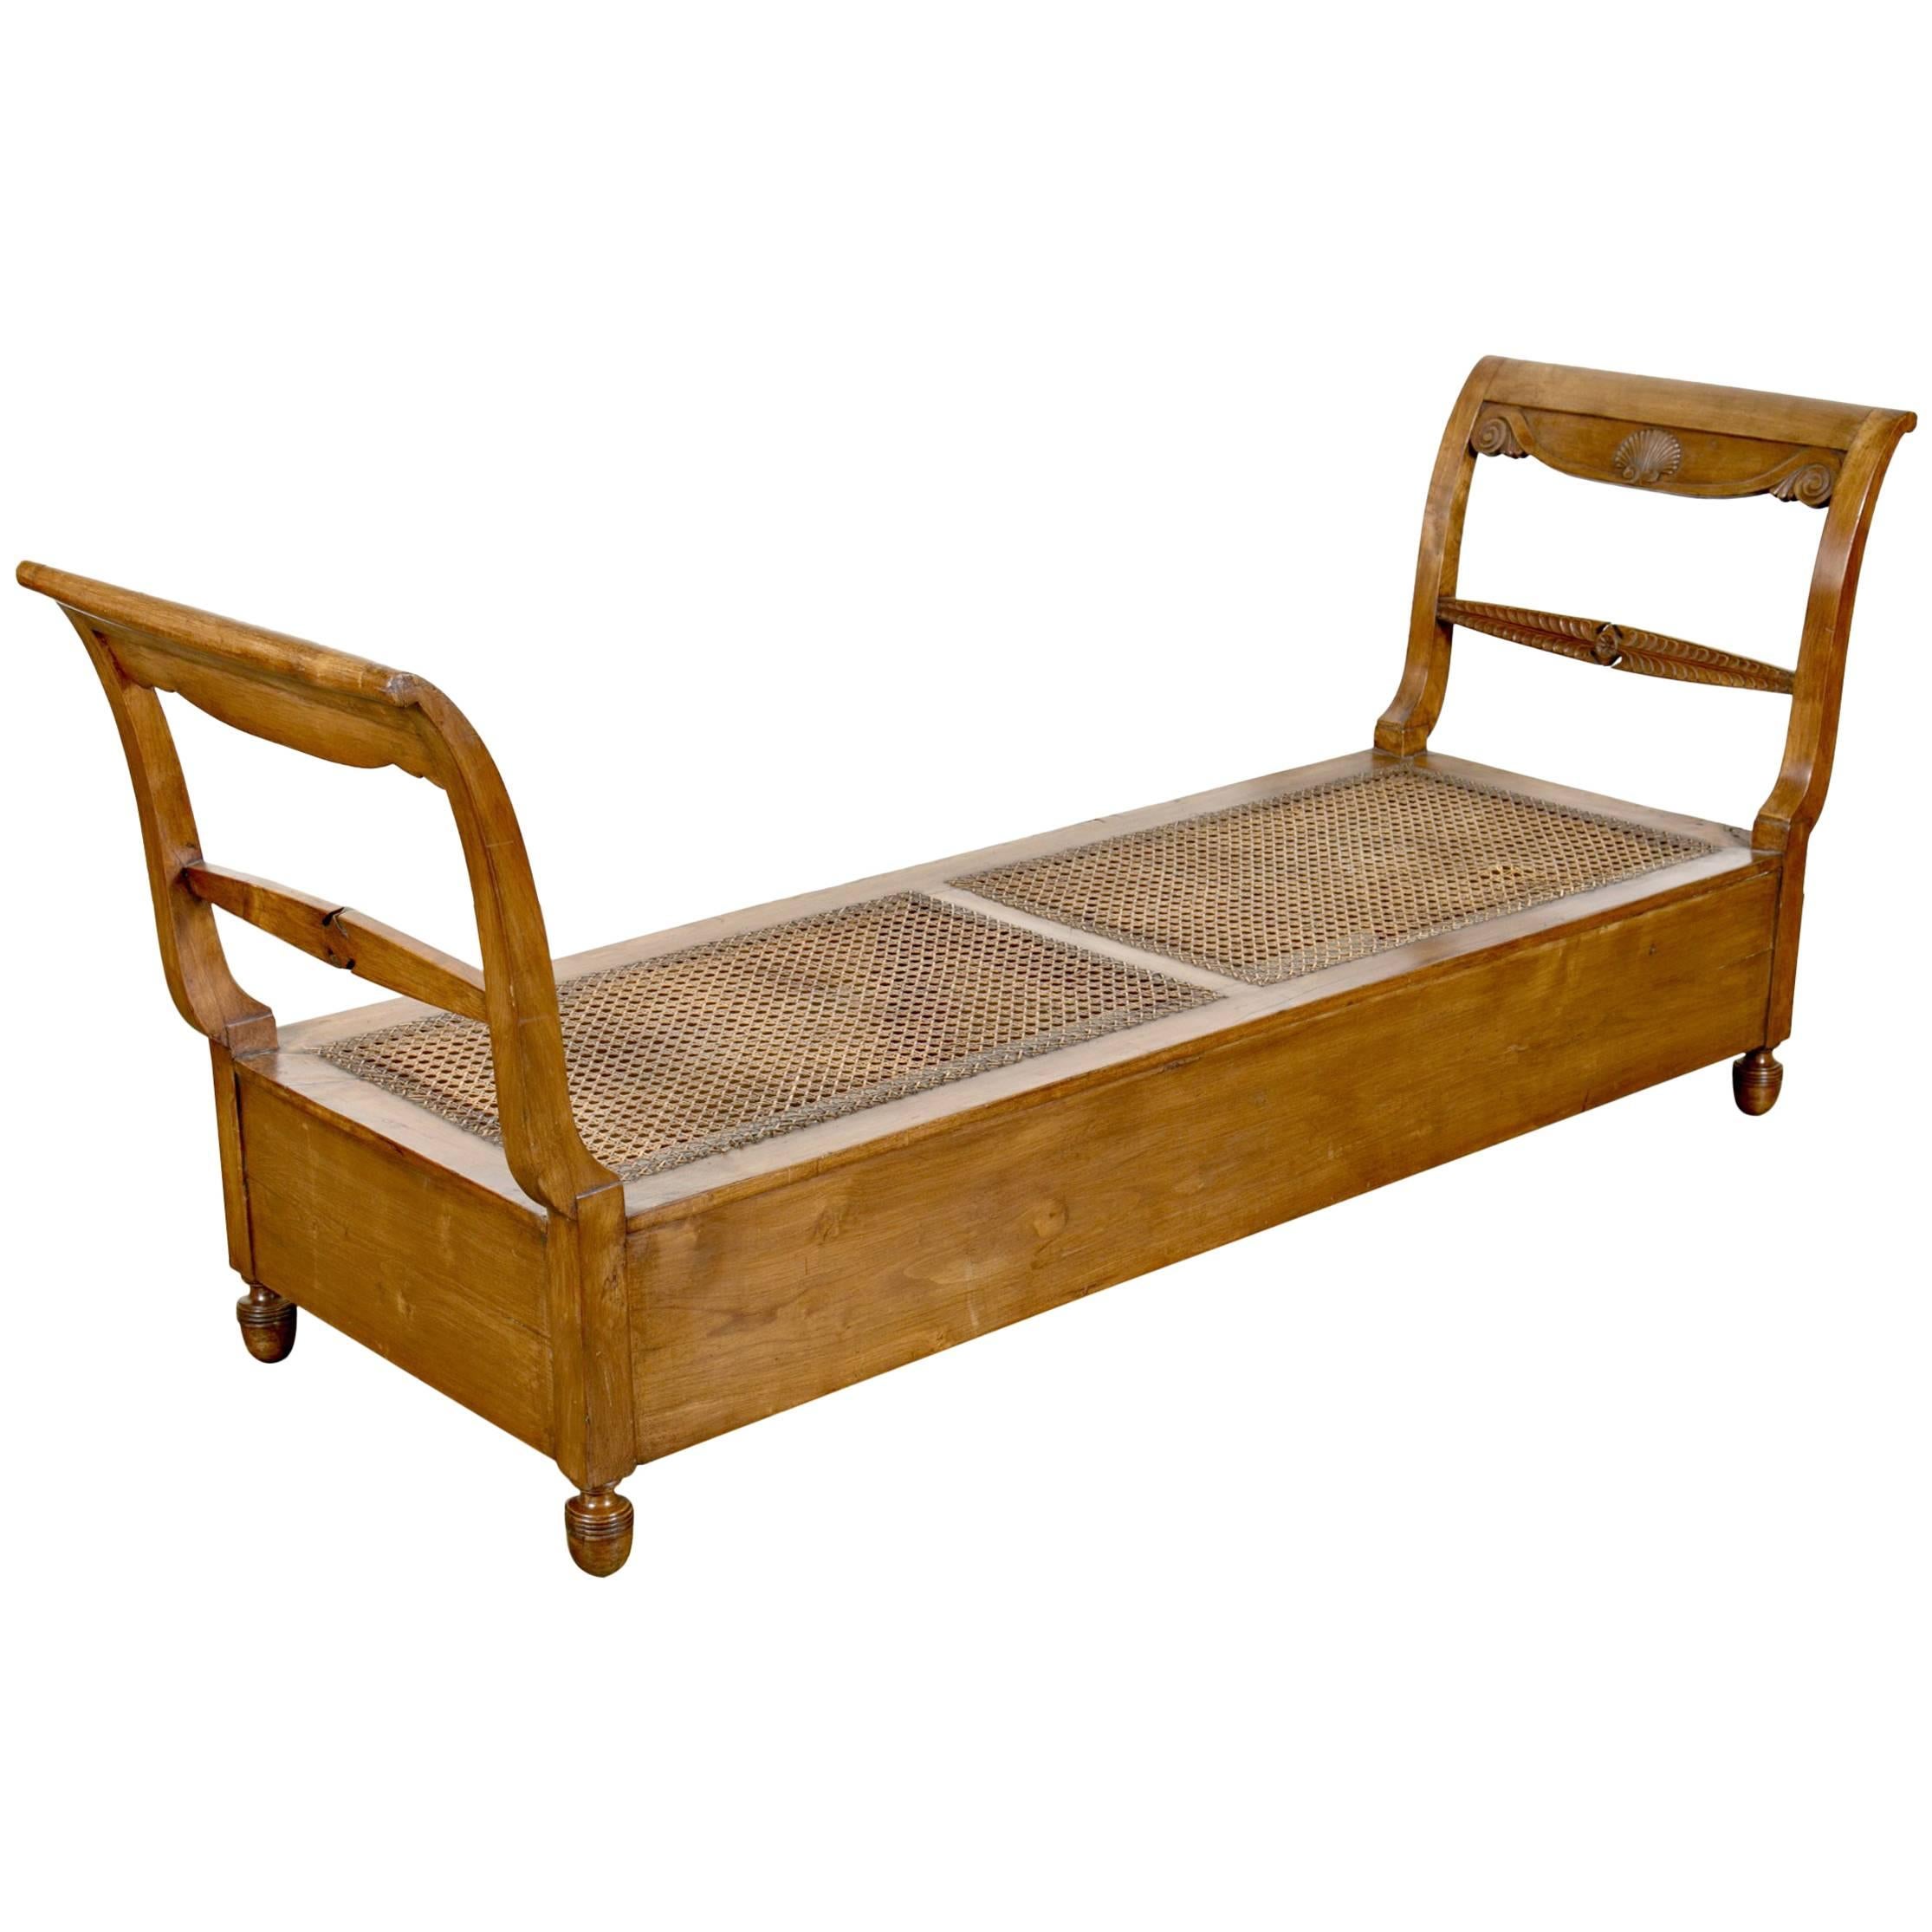 Antique French Provencal Cherry Daybed with Cane Seat